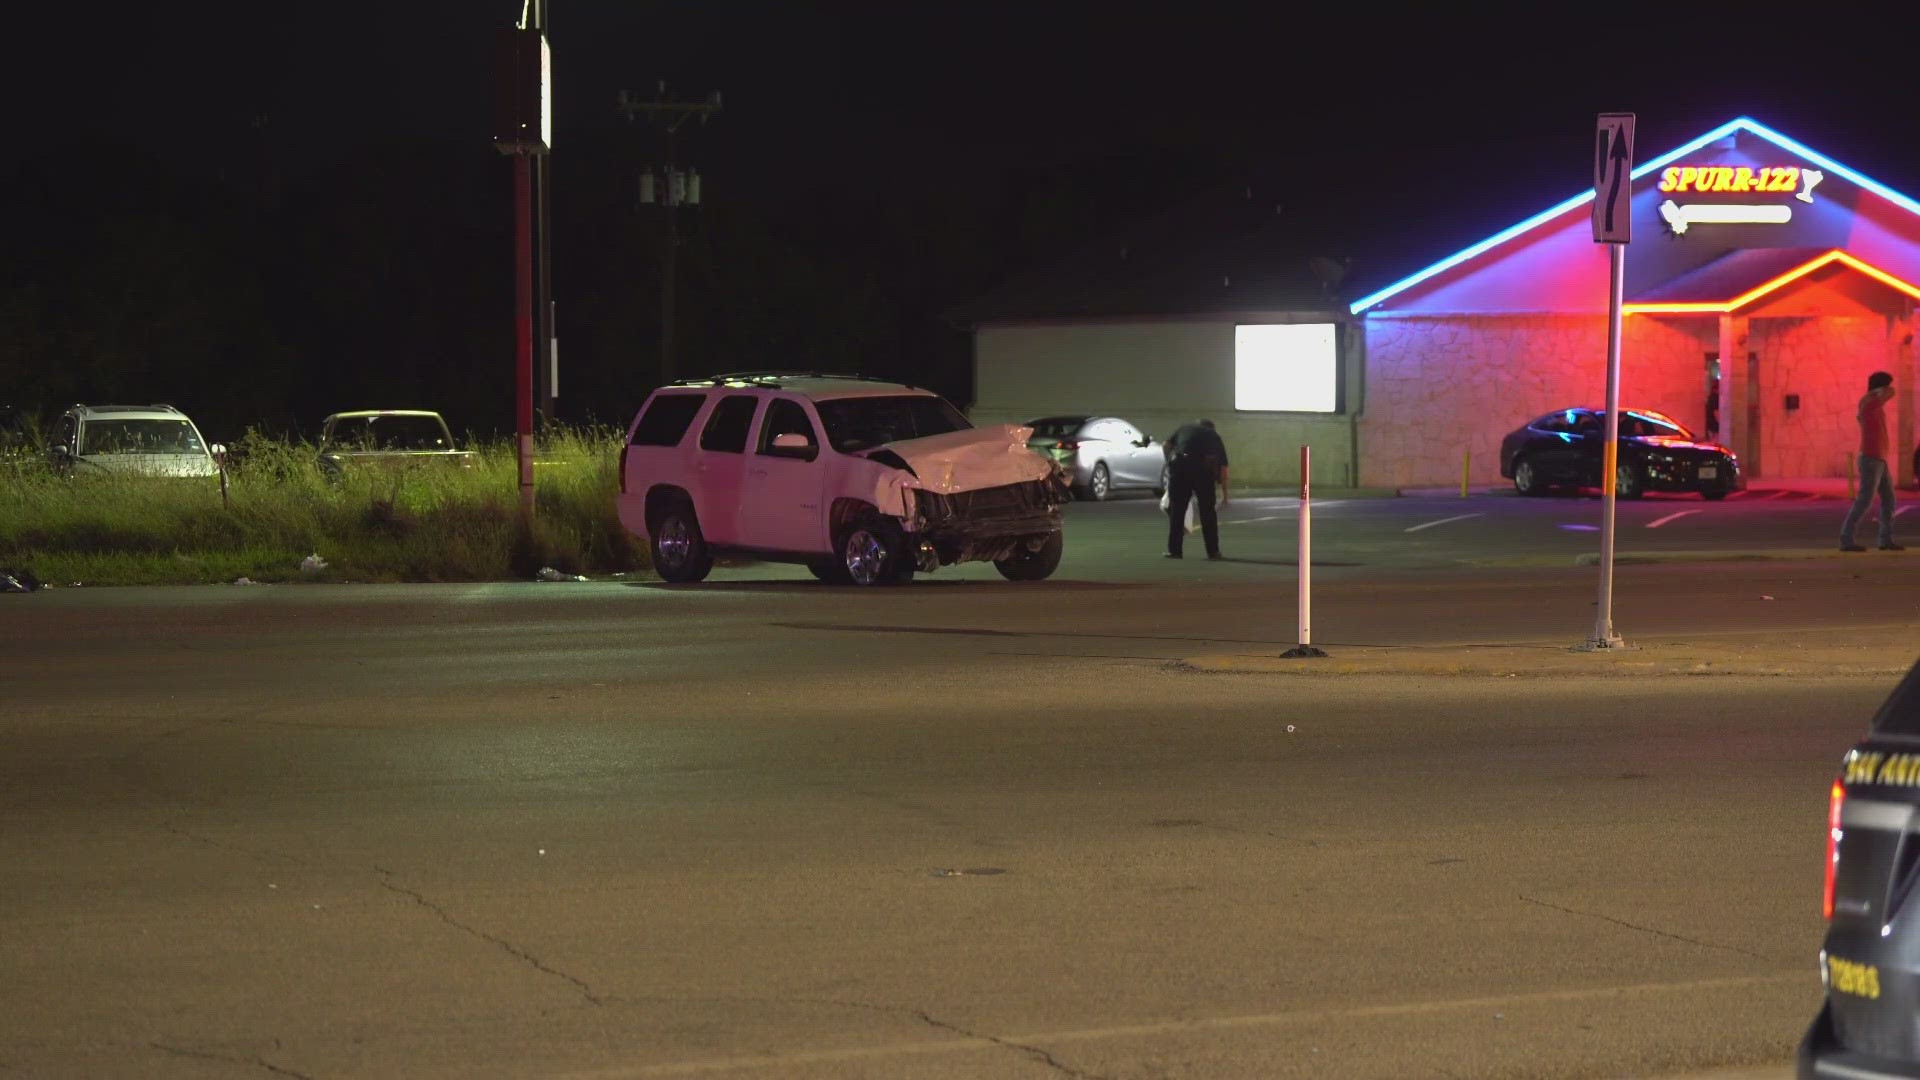 Police say the two were in a small car exiting a parking lot and struck by a driver in an SUV.